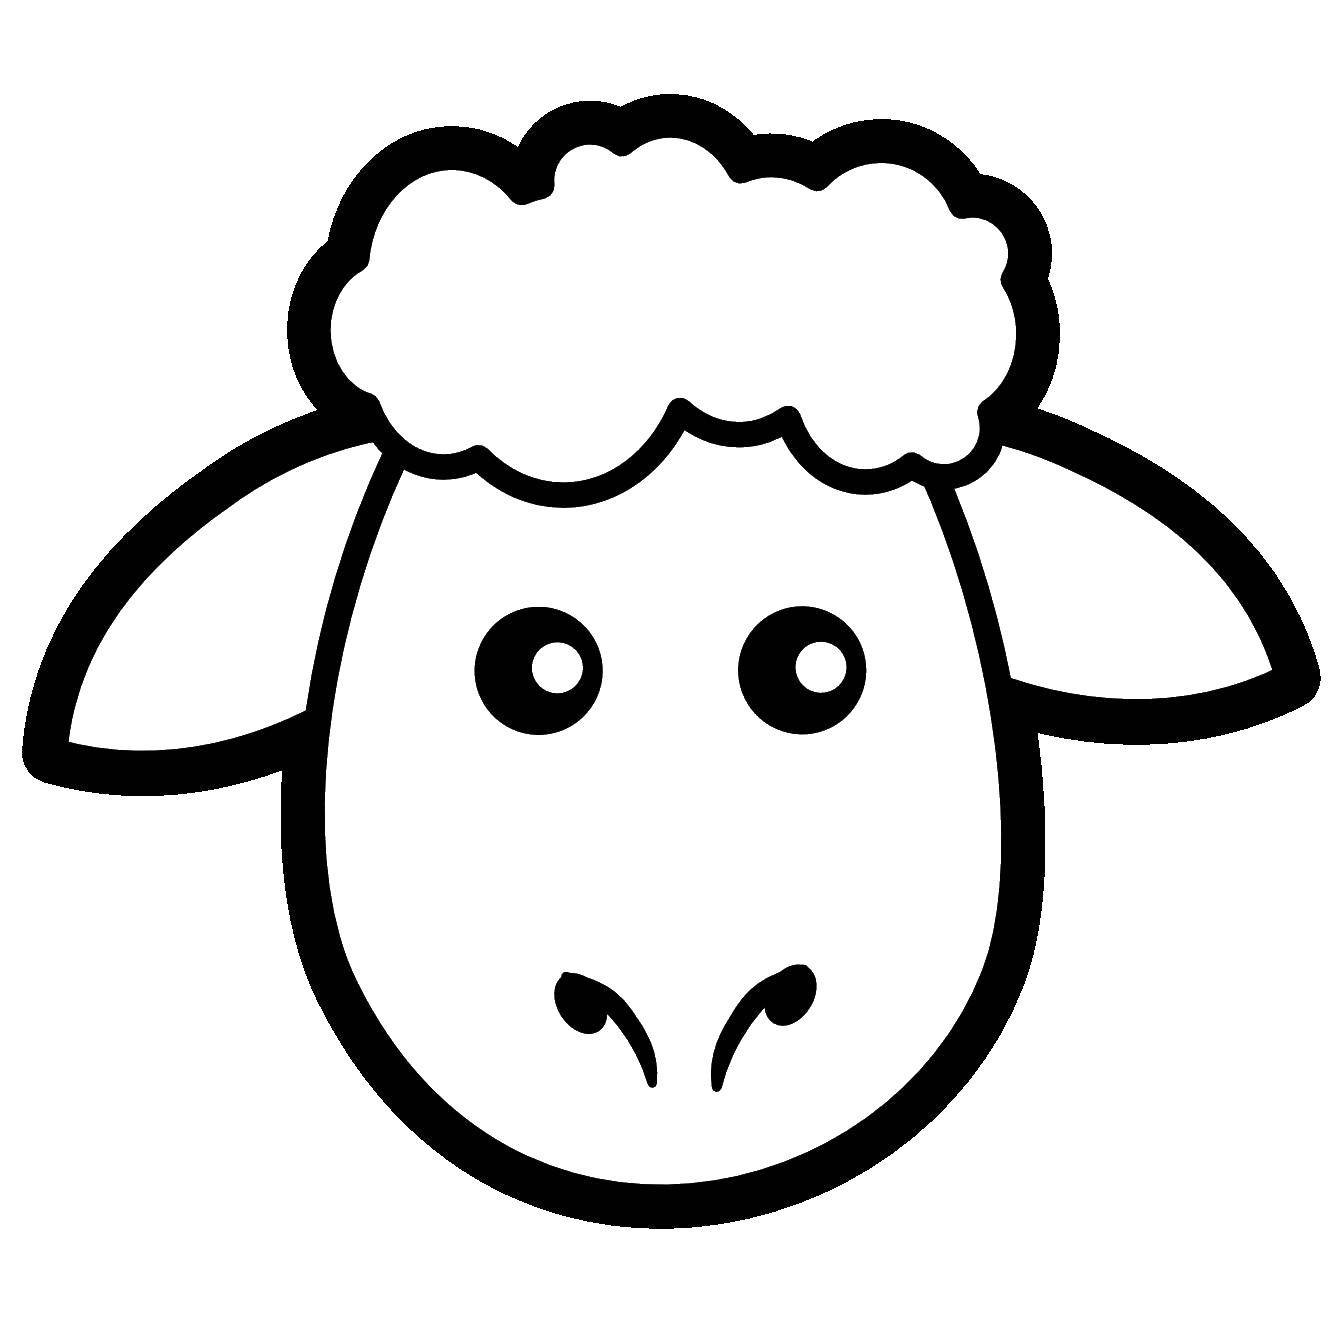 Coloring Head sheep. Category The contour of sheep to cut. Tags:  head, outline, sheep.